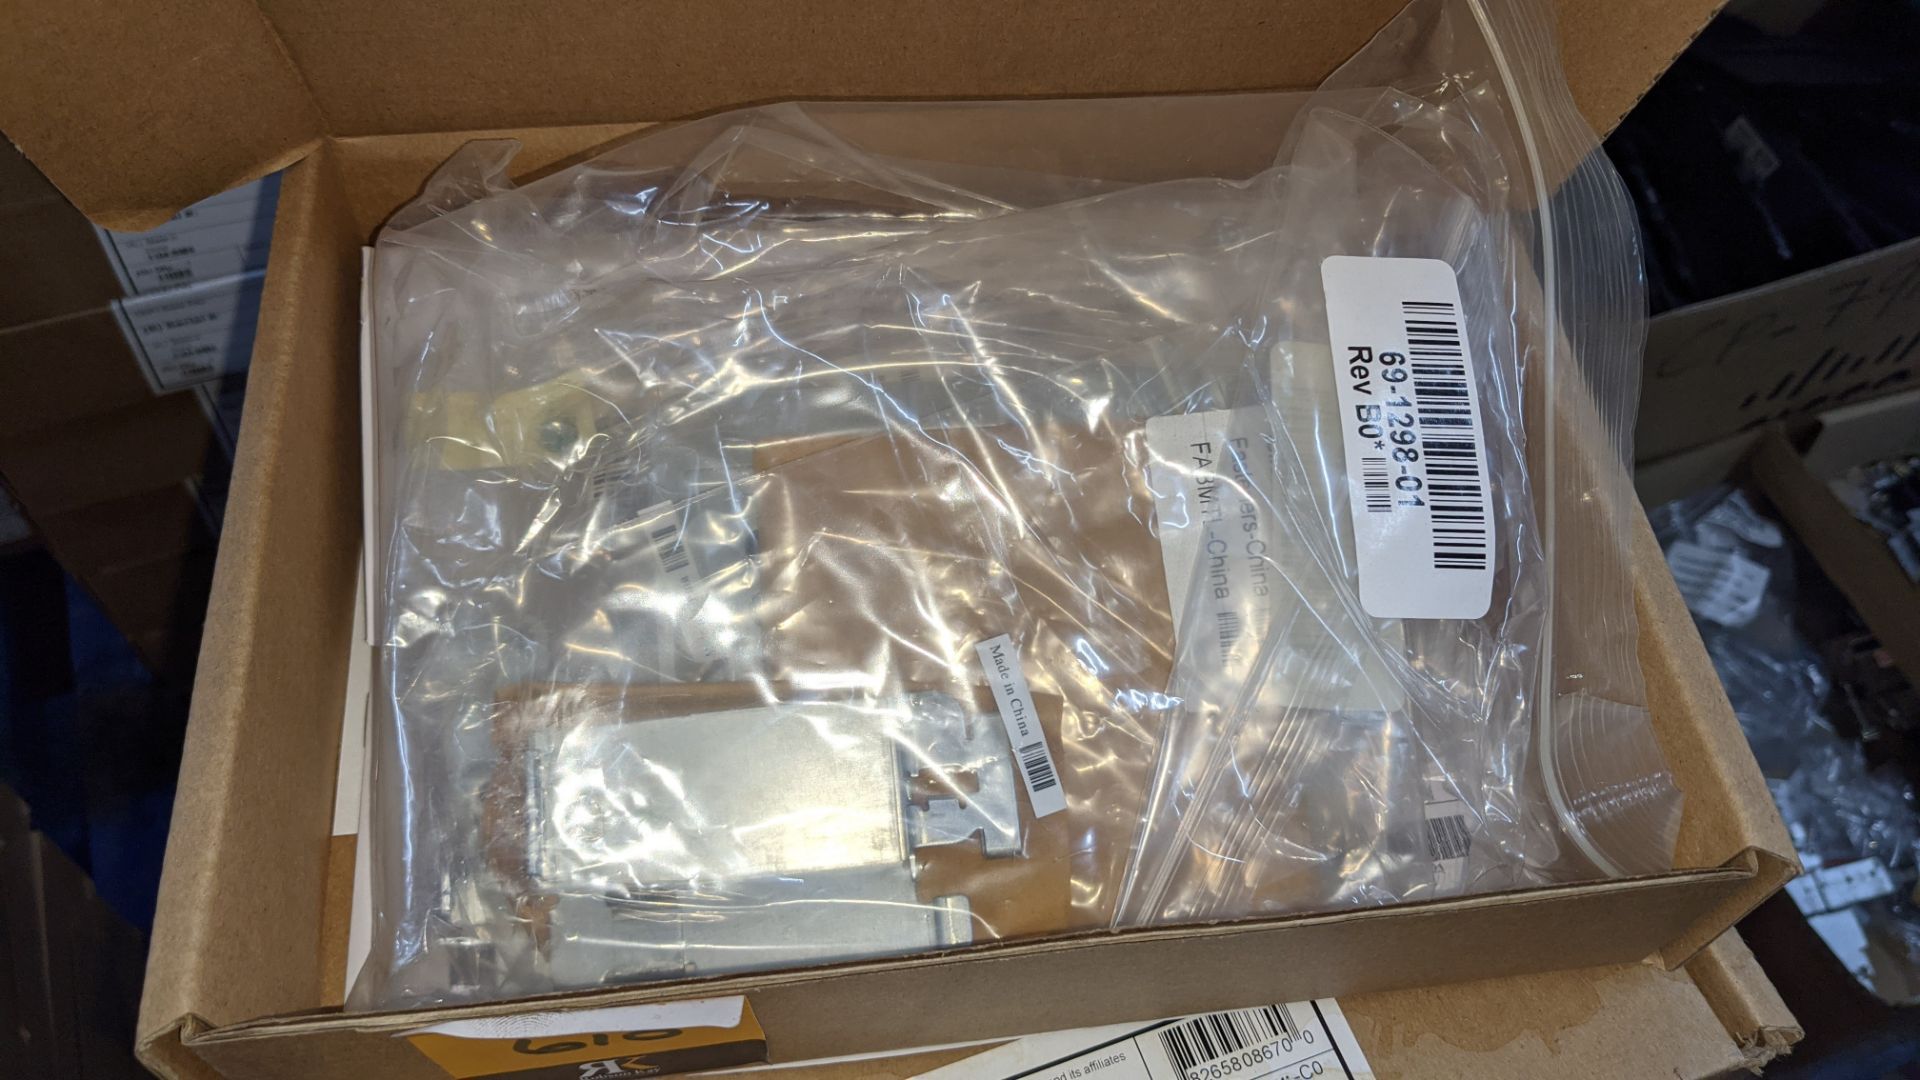 11 off Cisco Air Fixing kits model AIR-AP1130. All appear to be new & unused in Cisco branded boxes - Image 3 of 4